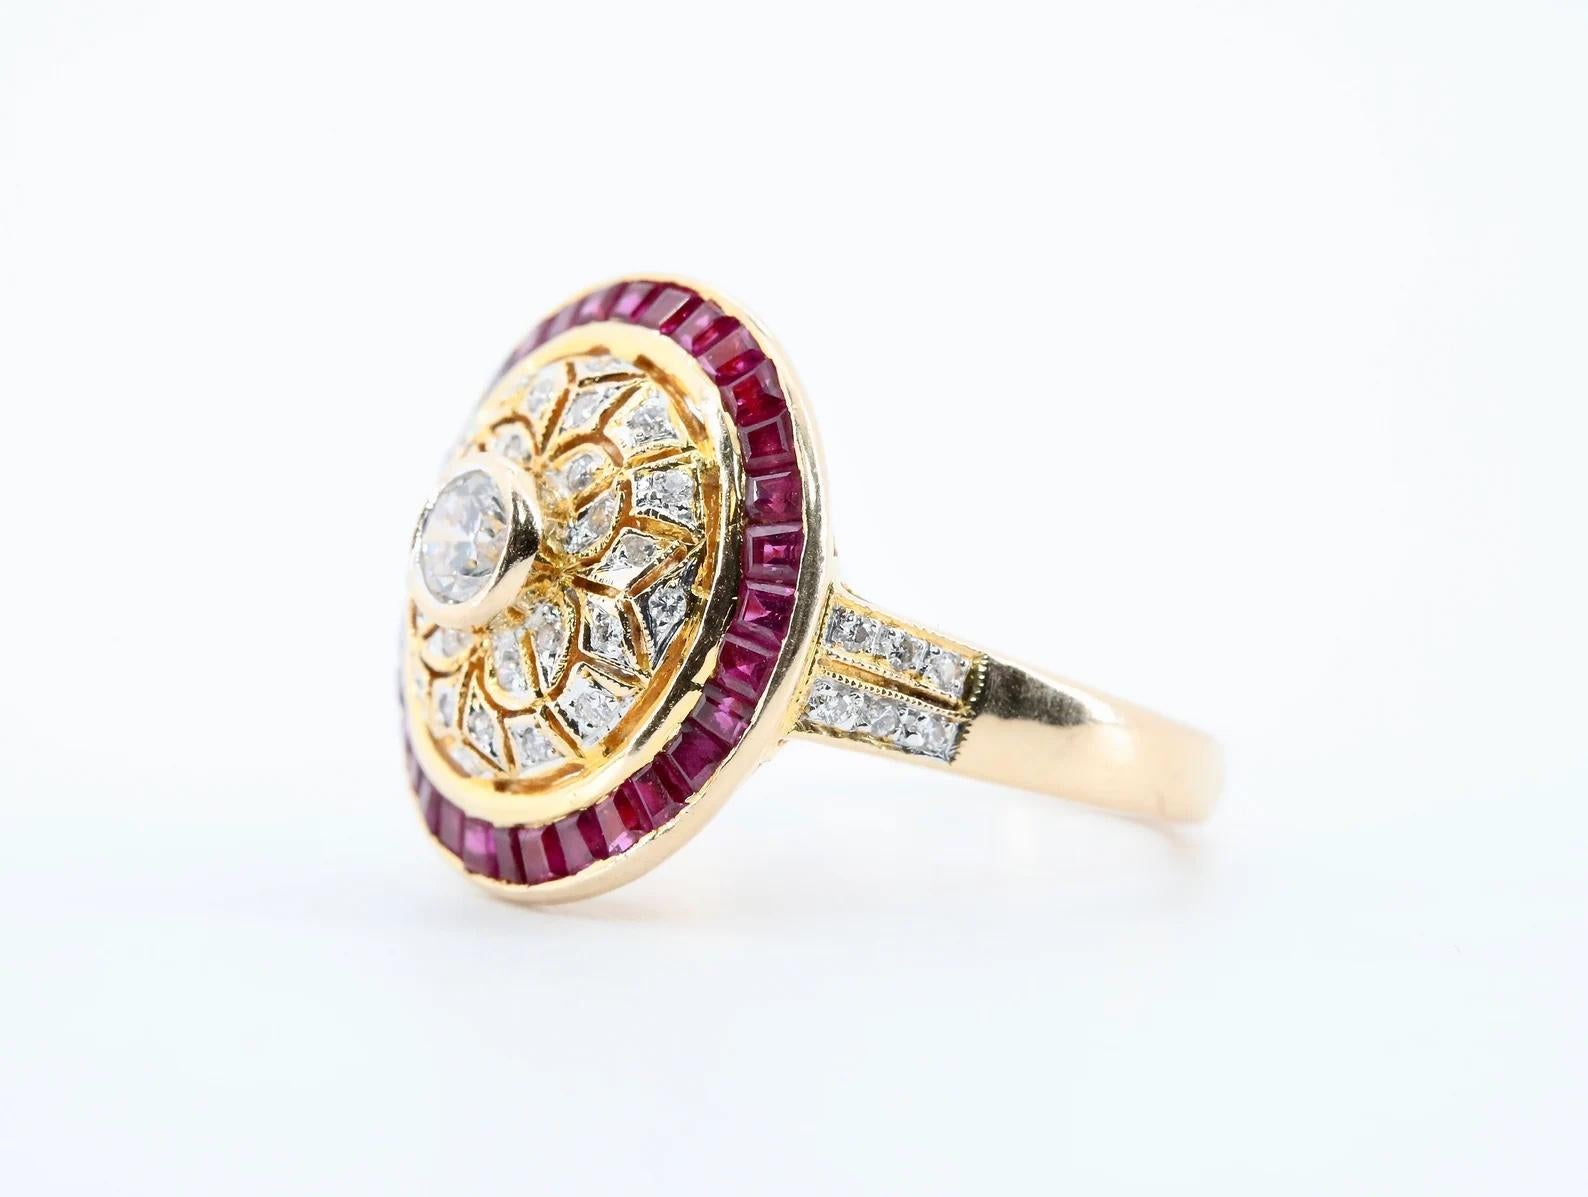 A beautiful ruby, and diamond cocktail ring in 18 karat gold. Centered by a 0.30 carat bezel set round brilliant cut diamond, and accented with 0.26 carats of pave set diamonds. The handmade mounting features filigree work throughout, complemented